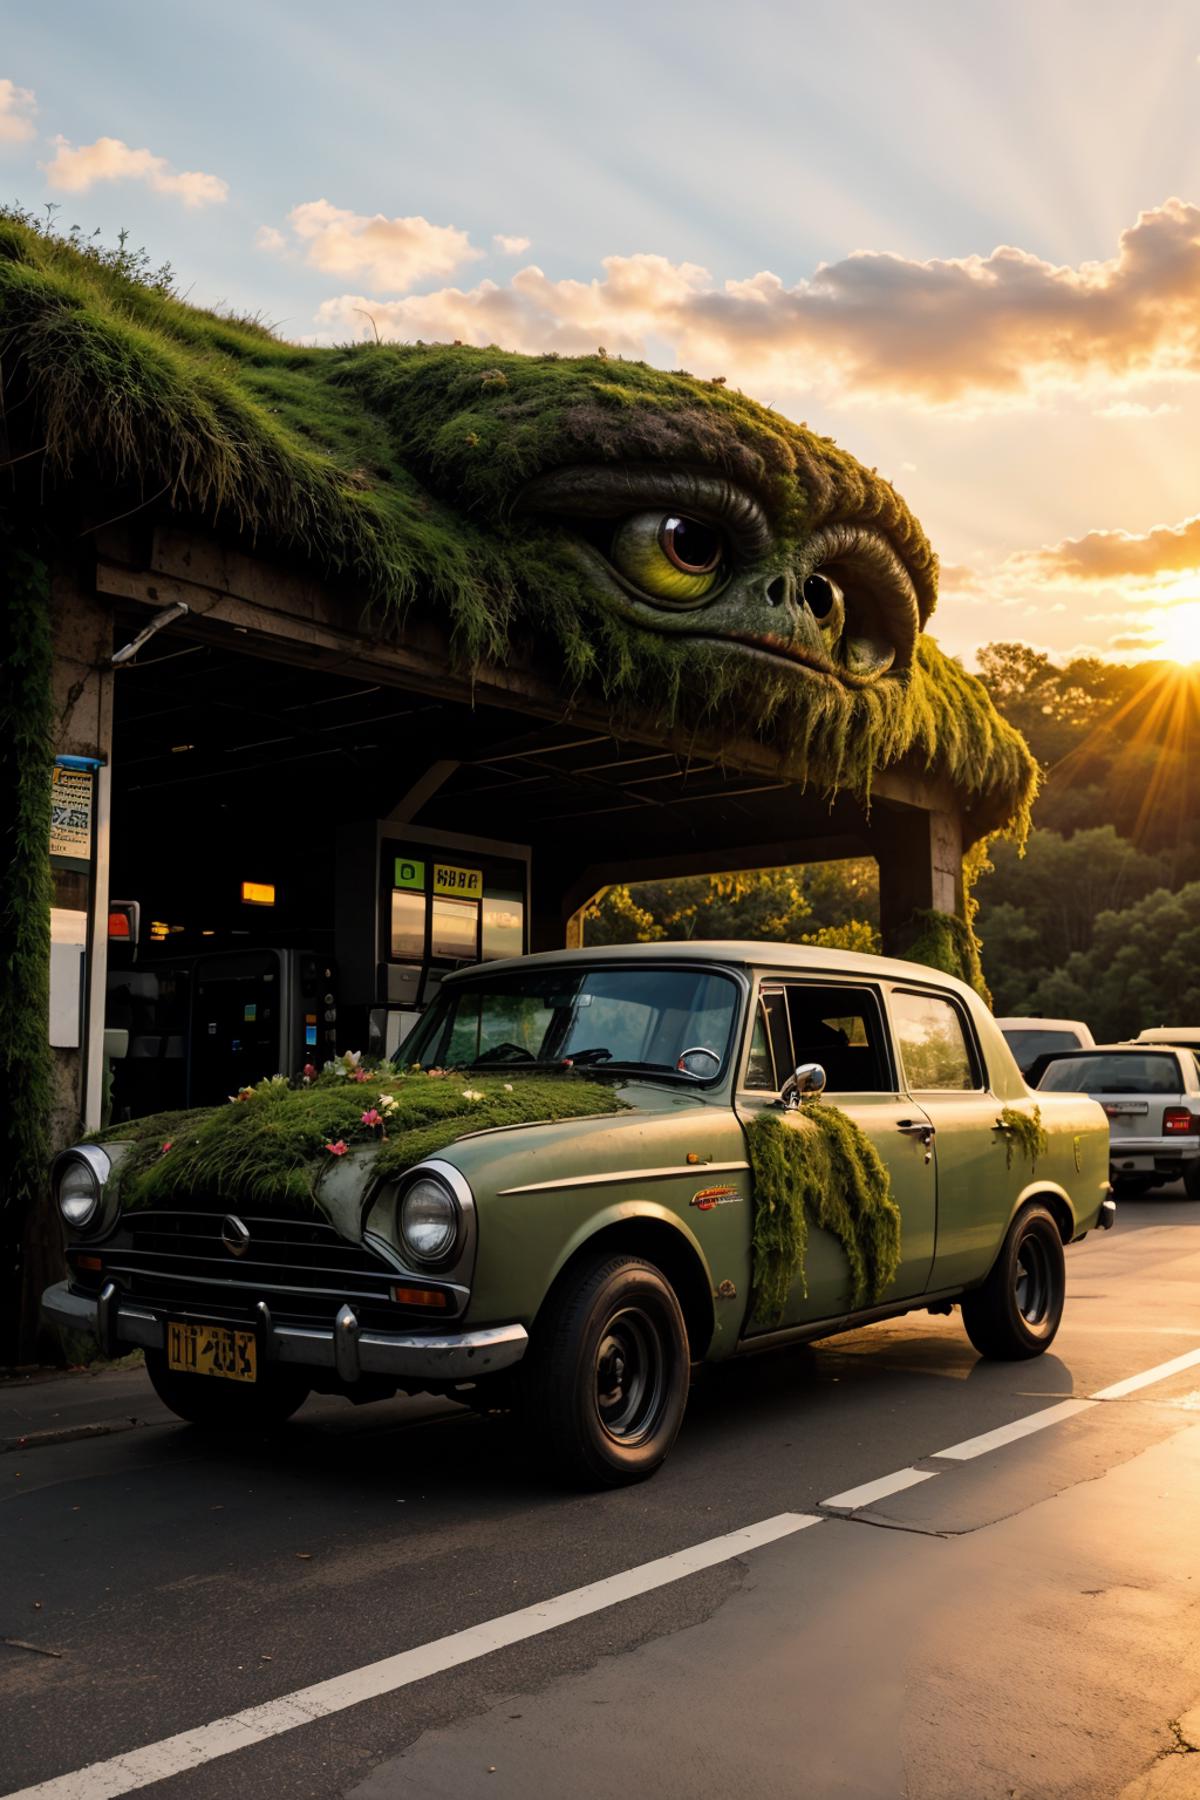 An old green car covered in moss and flowers, parked in front of a green monster or alien.